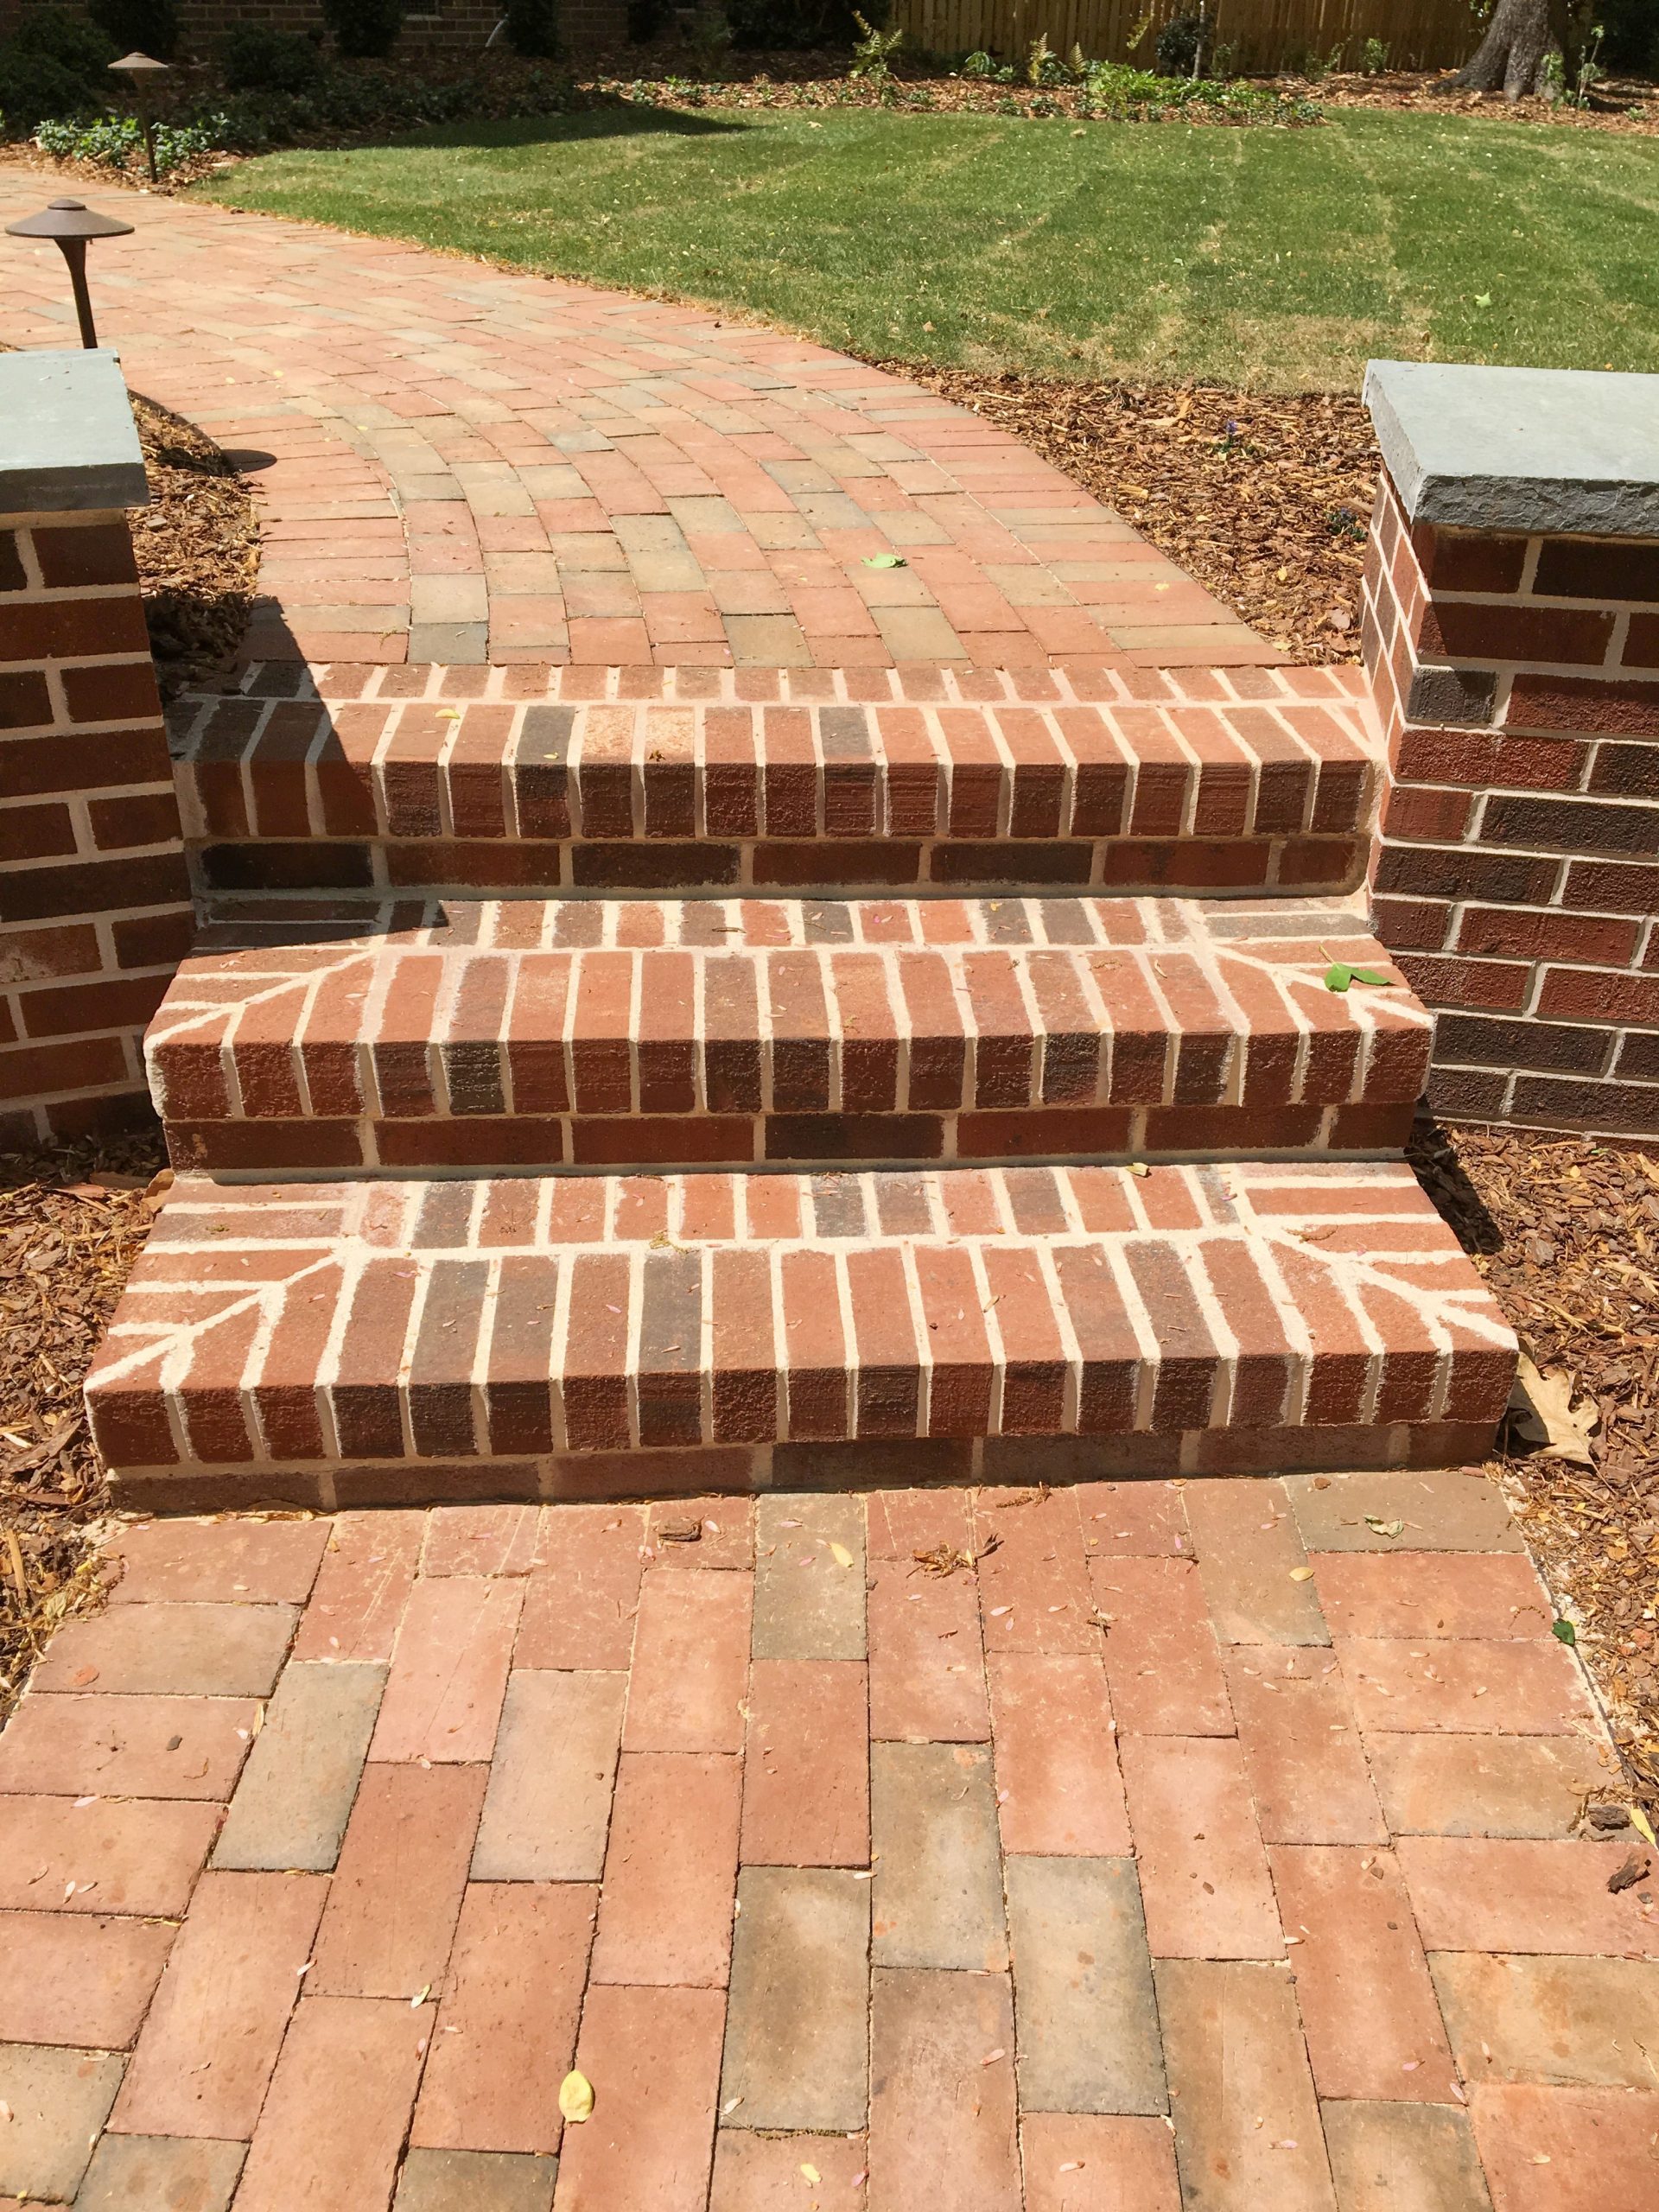 35 Wonderful DIY Ideas to Decorate Your Yard With Bricks | Engineering Discoveries